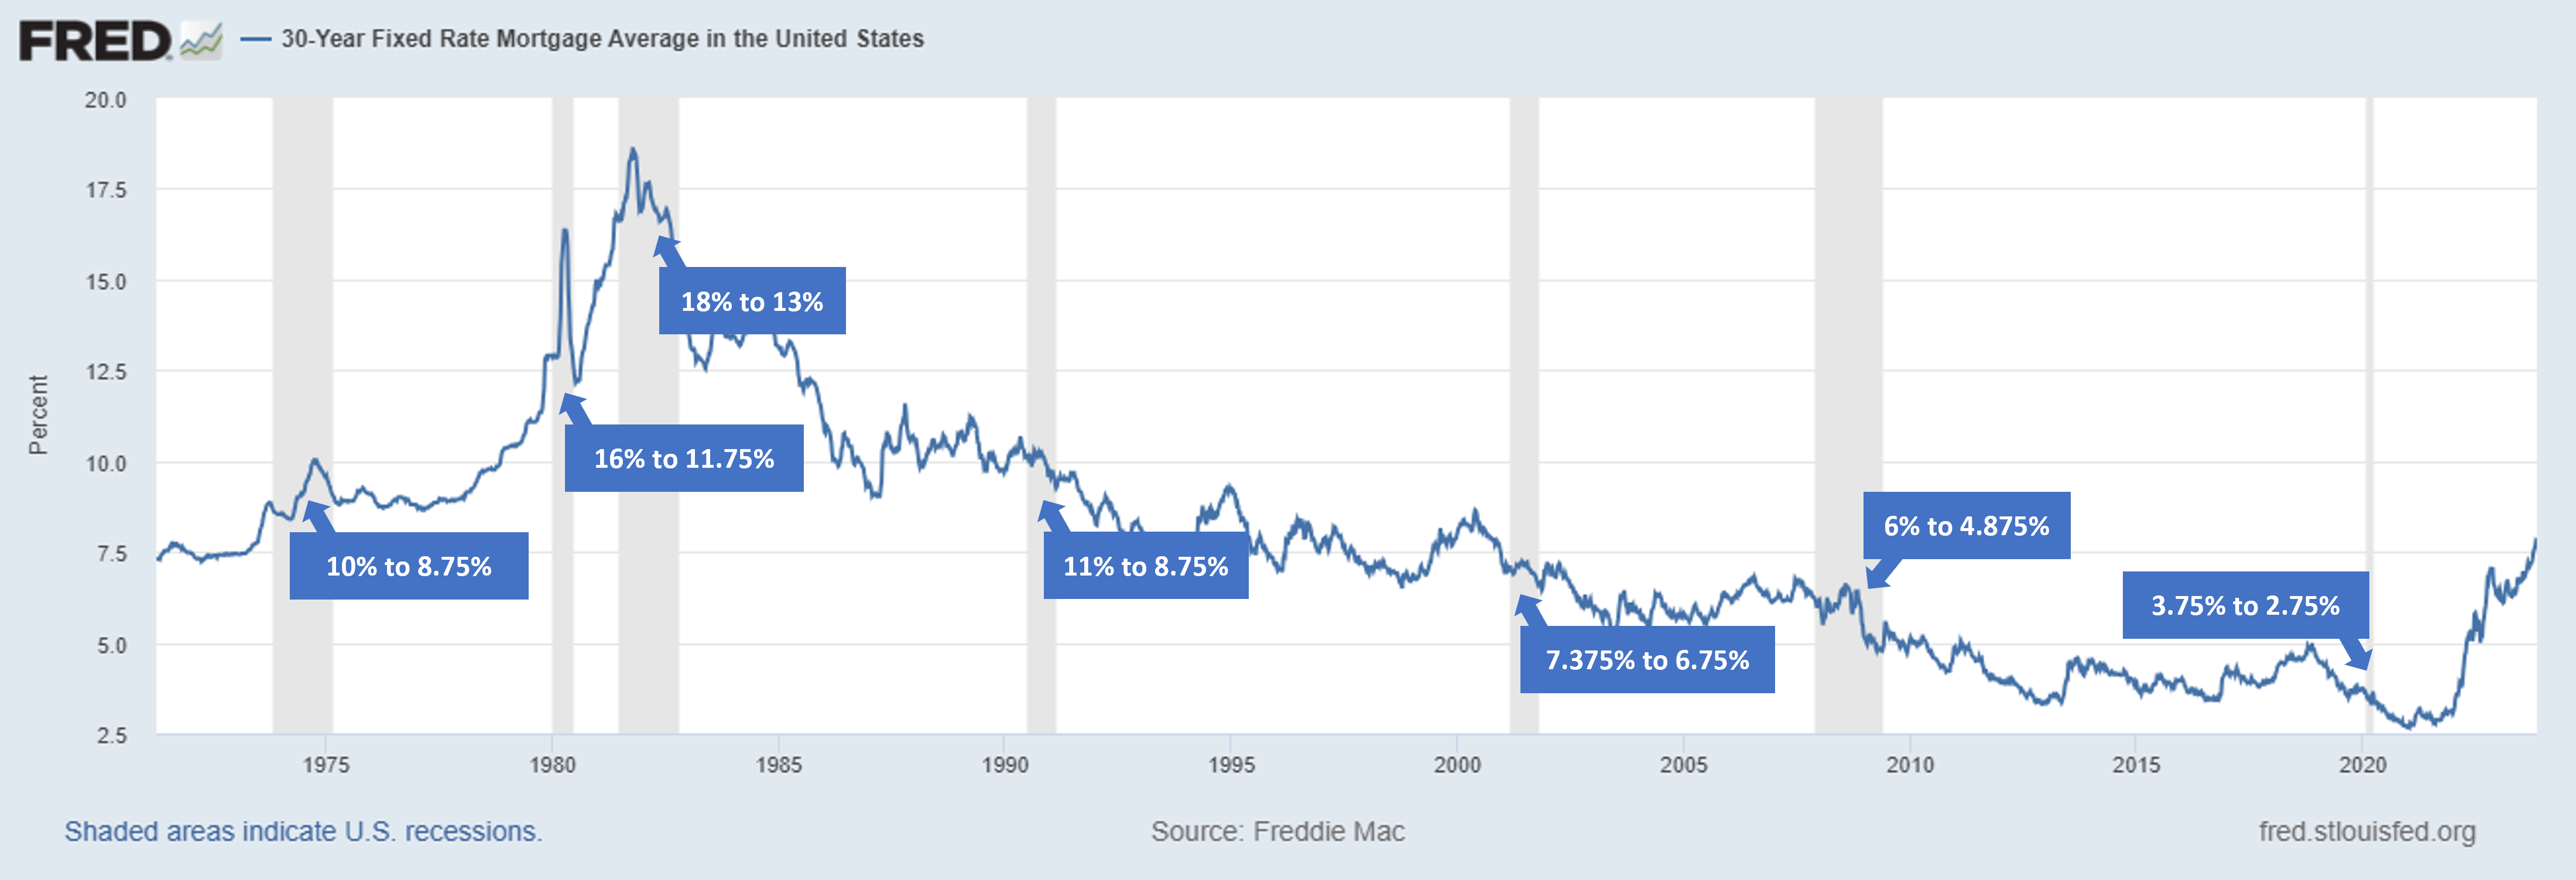 30-Year Fixed Mortgage Rate Average in the United States